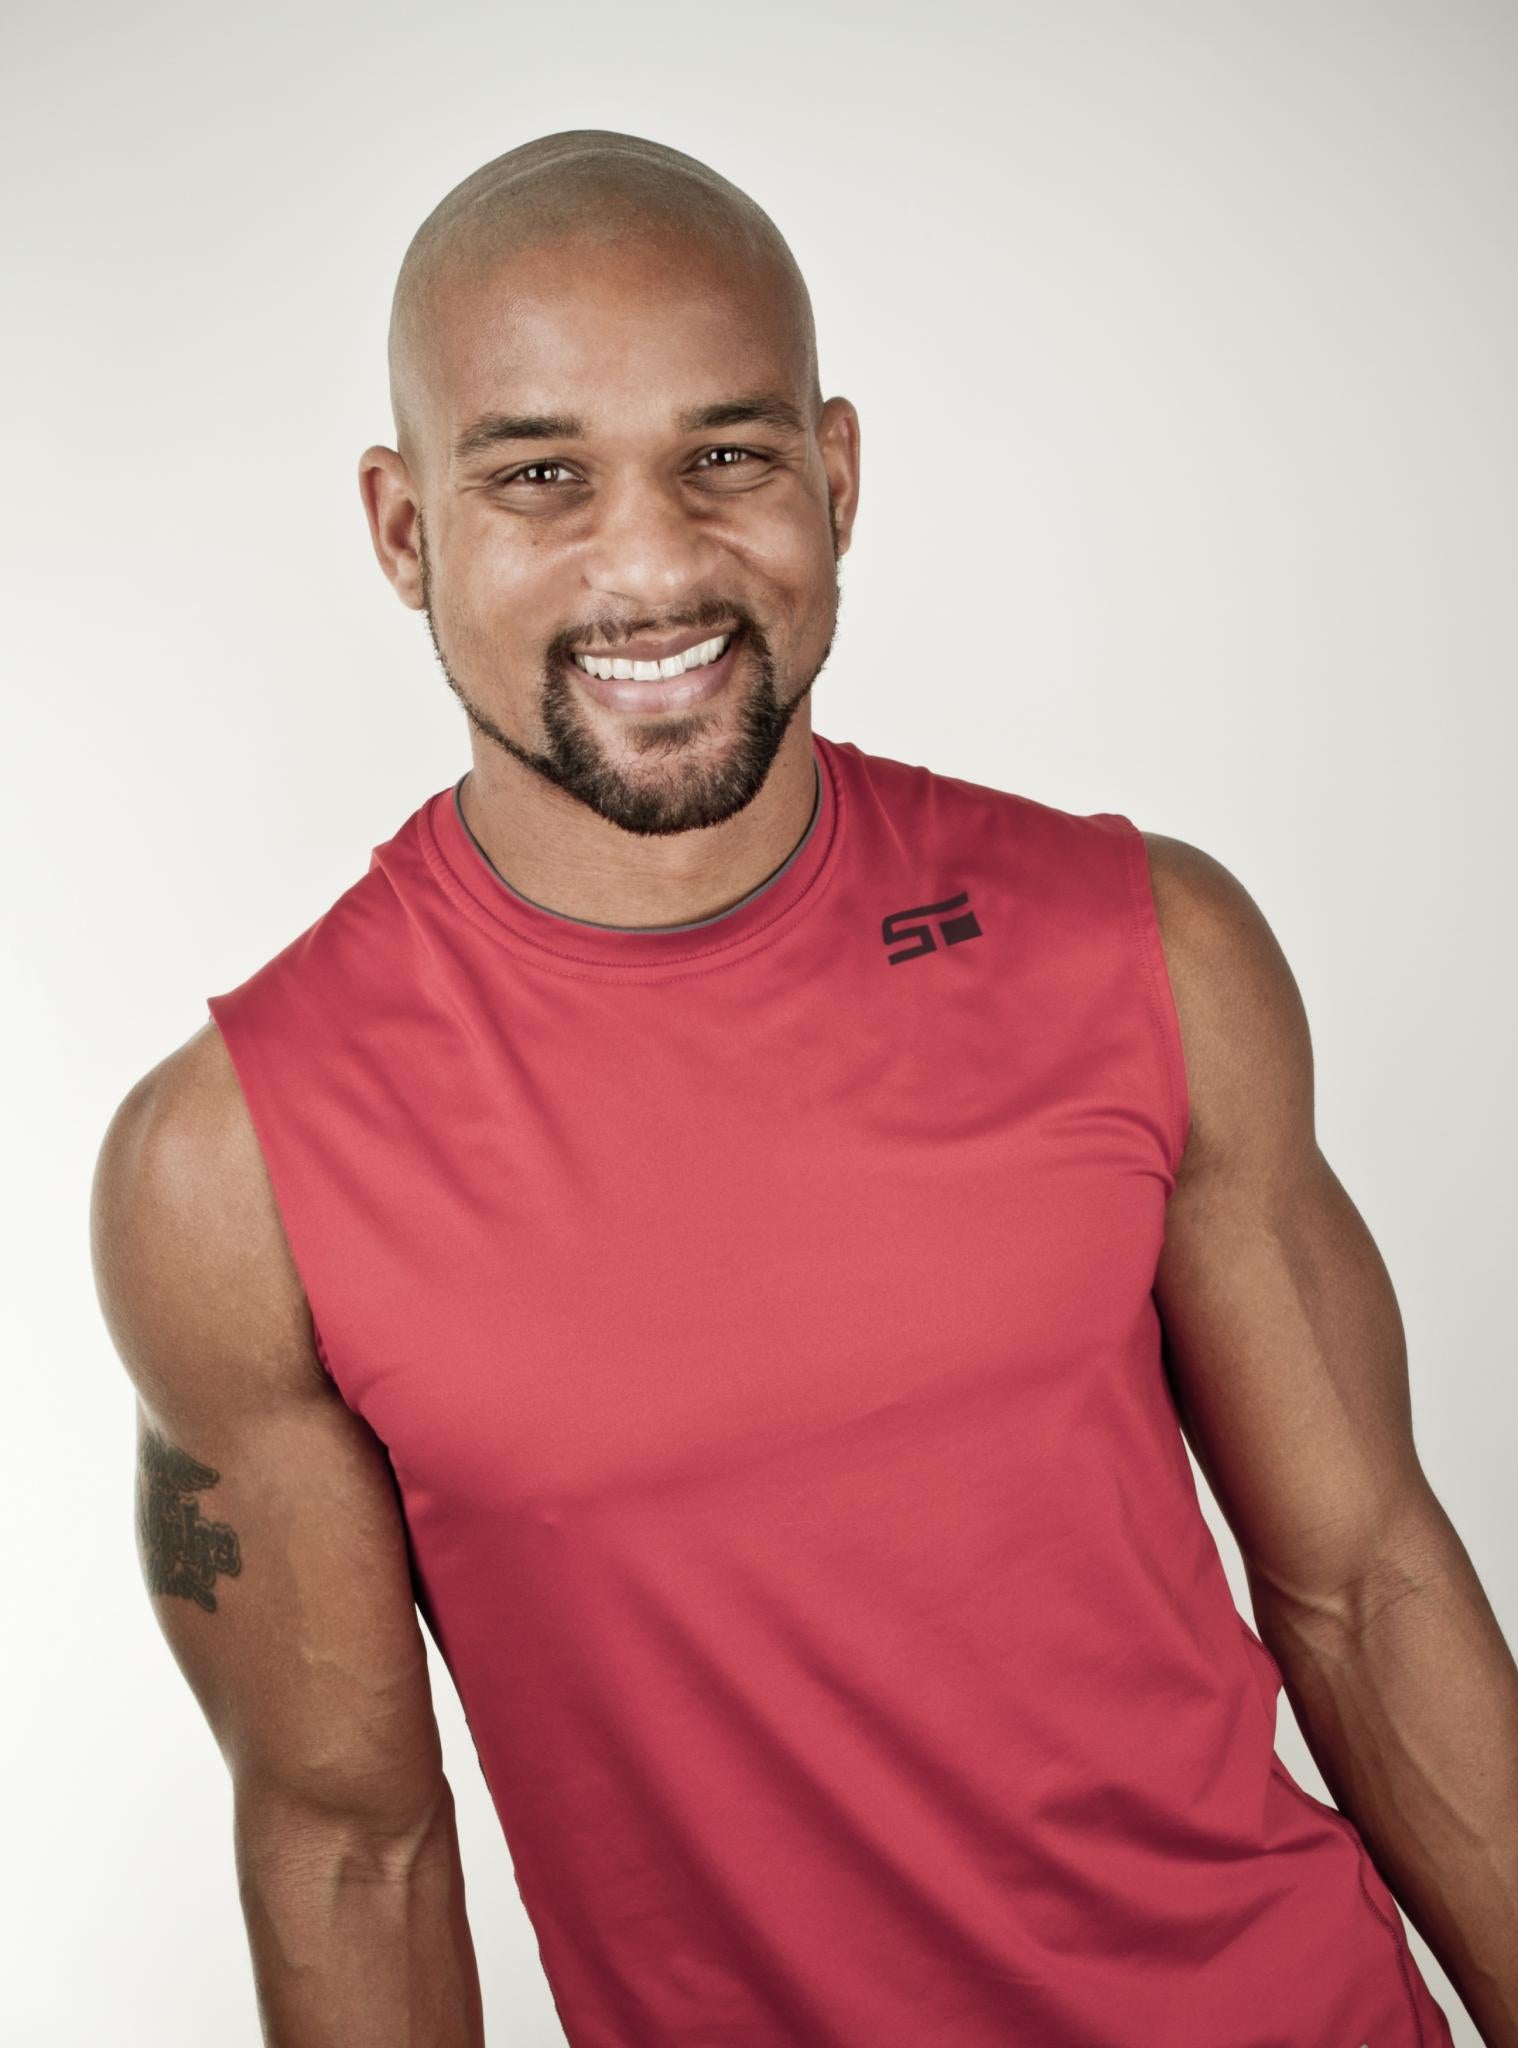 Shaun T Wants to Help You 'Define Your Life' at ESSENCE Fest